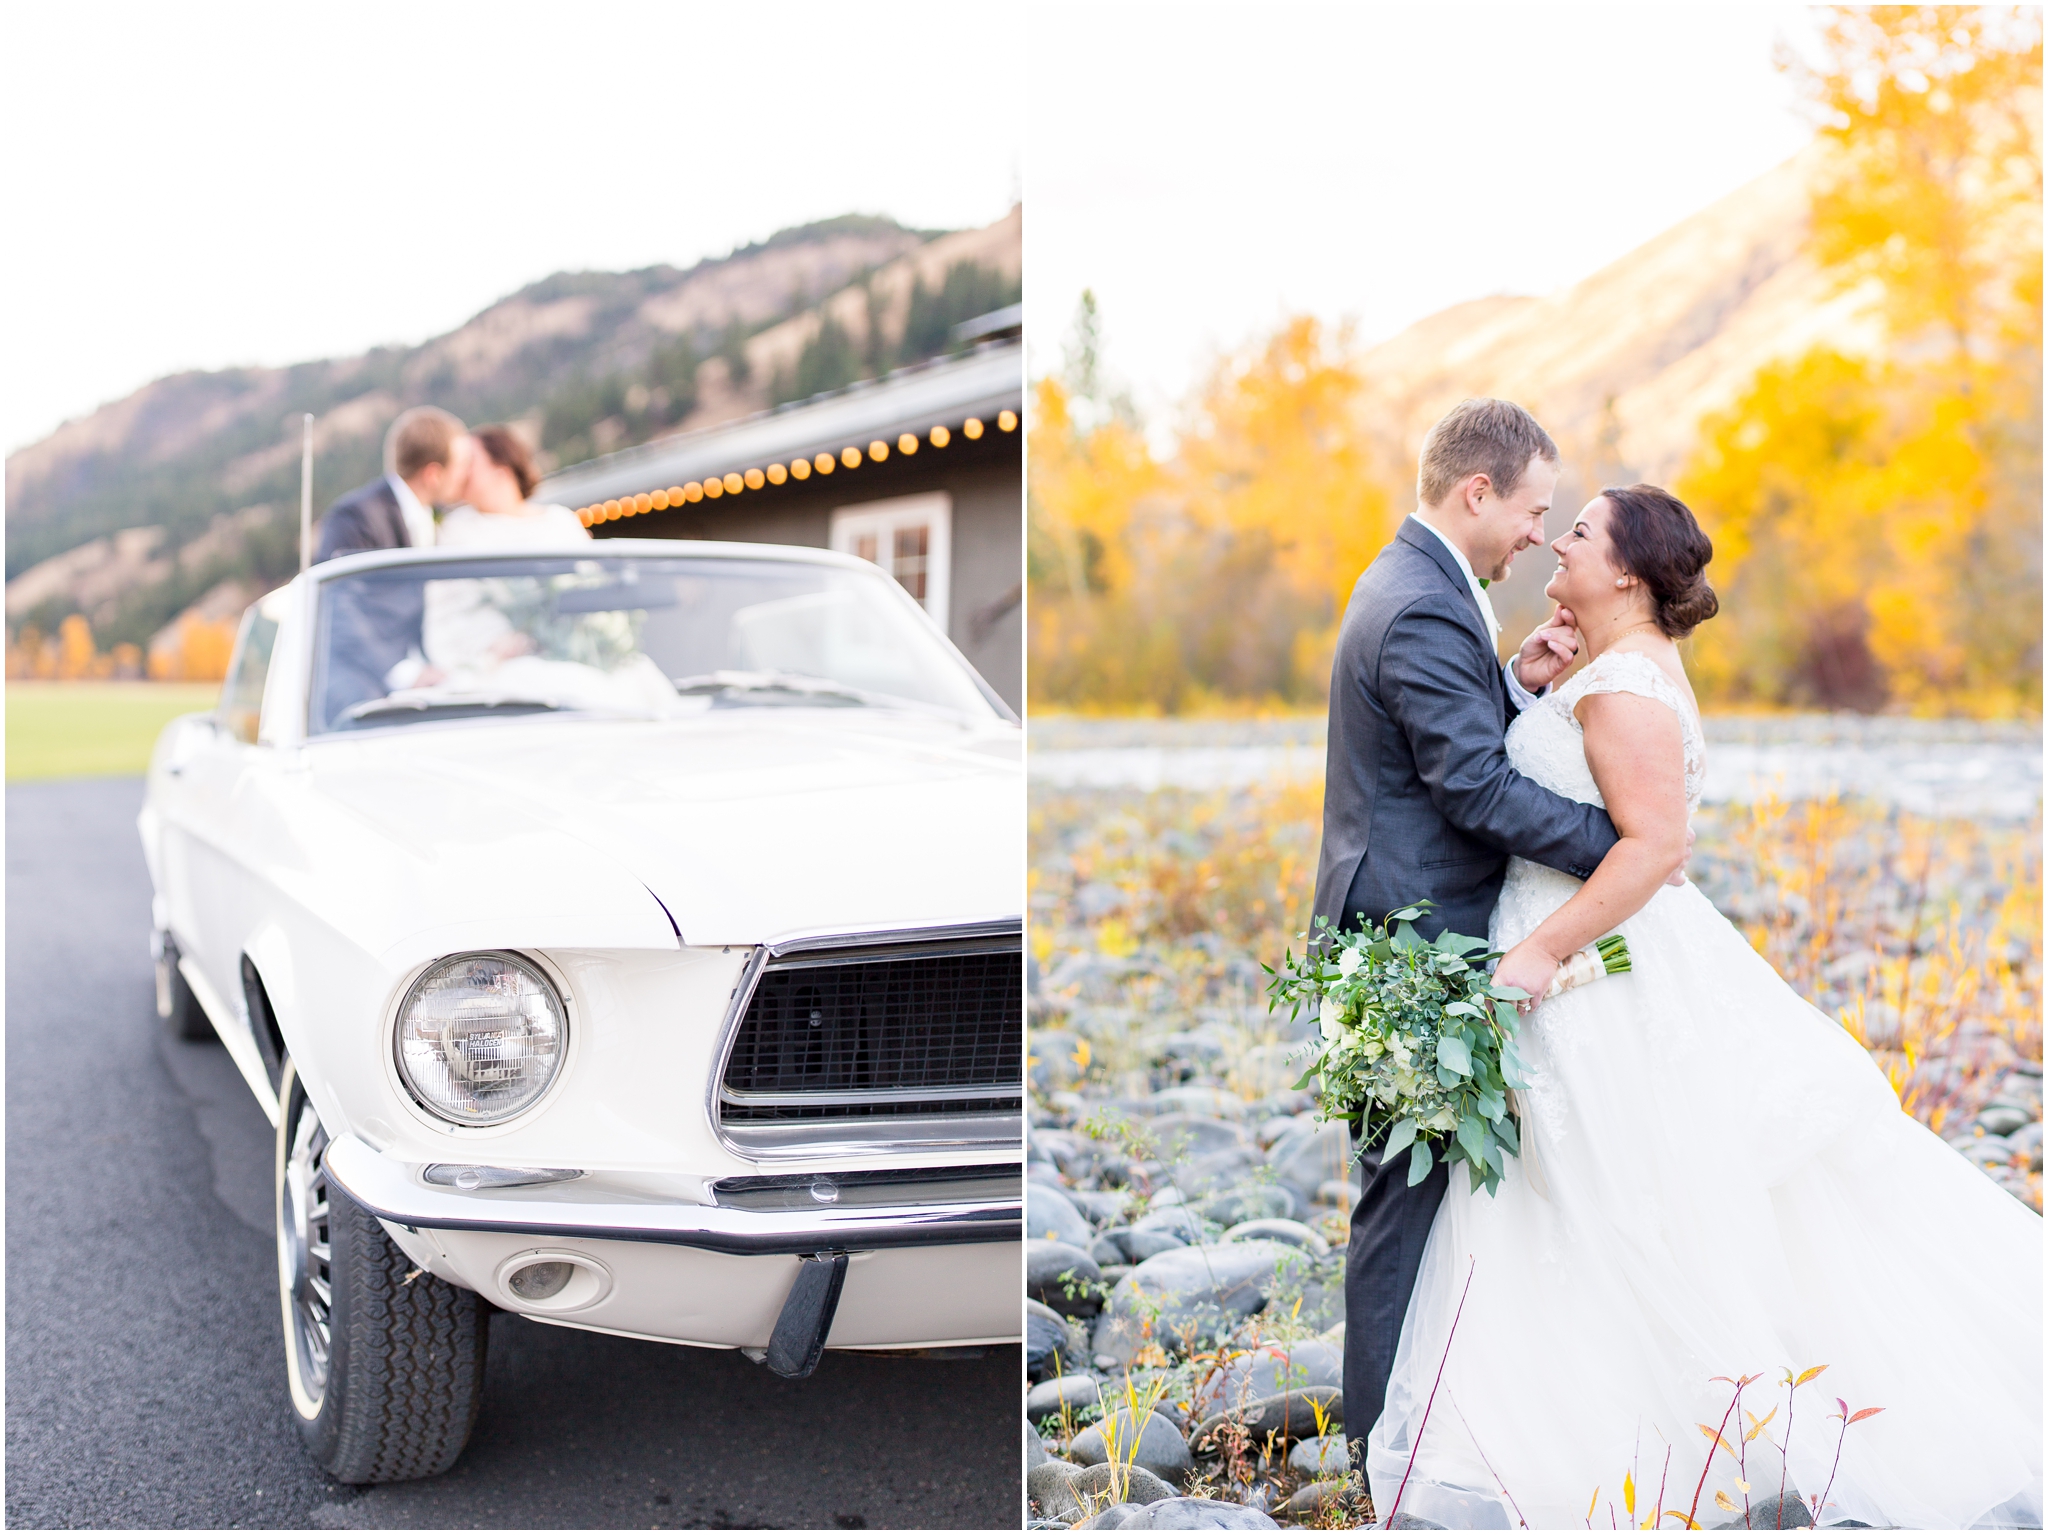 This American Homestead wedding was a Yakima wedding captured by Spokane wedding photographer Taylor Rose Photography at one of the best Yakima wedding venues, the American Homestead. Taylor Rose Photography is a Northern Virginia Wedding photographer and DC wedding photographer capturing weddings, engagement sessions and anniversaries across the U.S. and beyond. Including vintage getaway car - mustang.